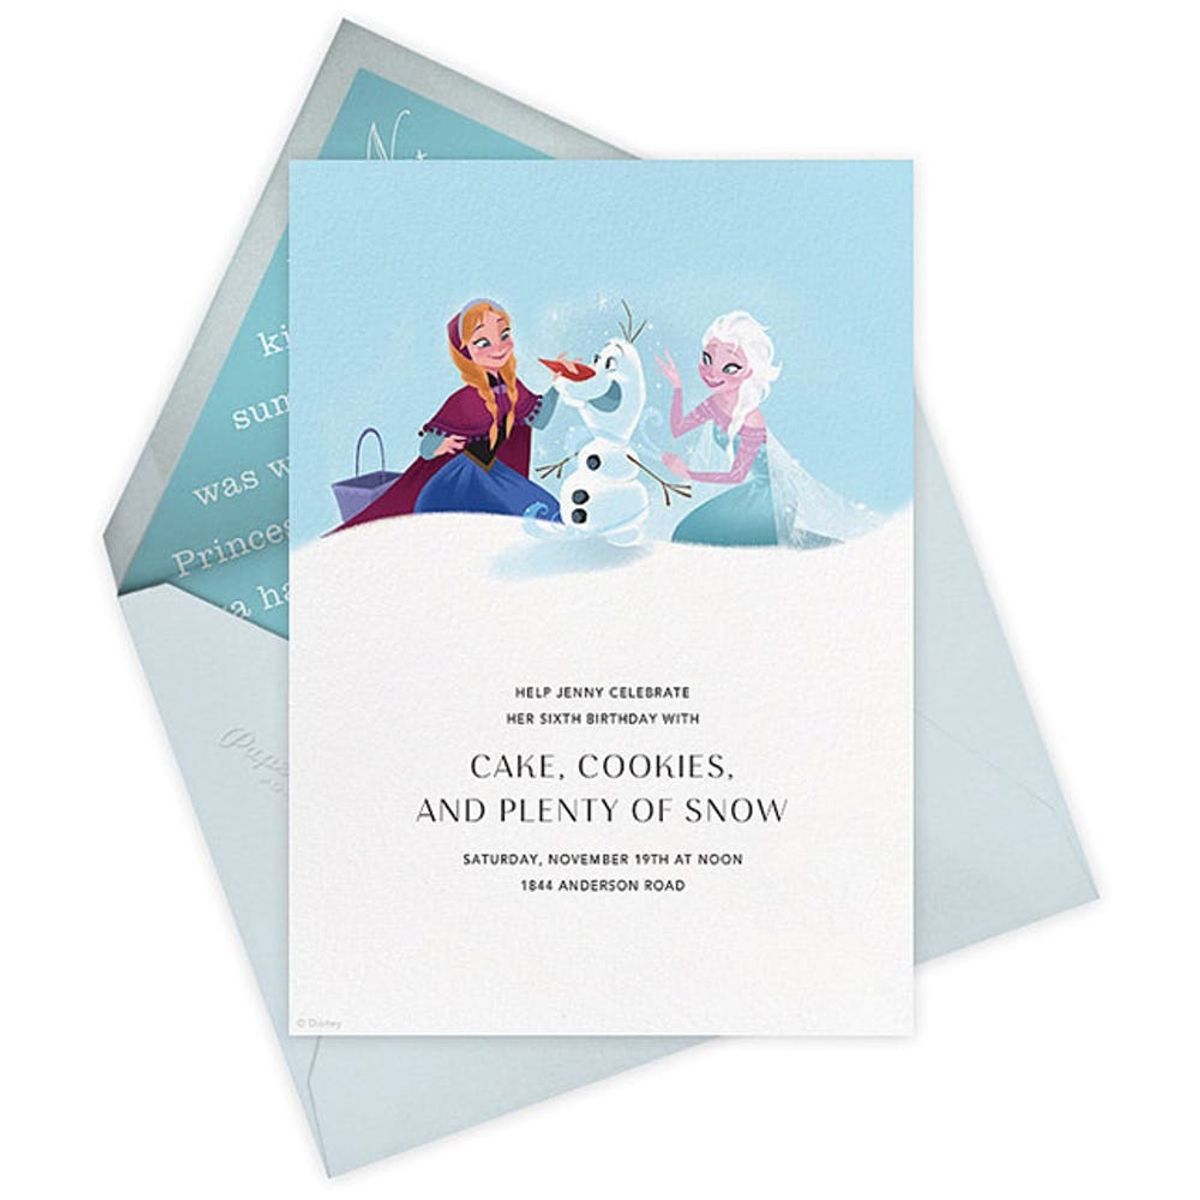 Disney Lovers, These Invitations Are a Must Send